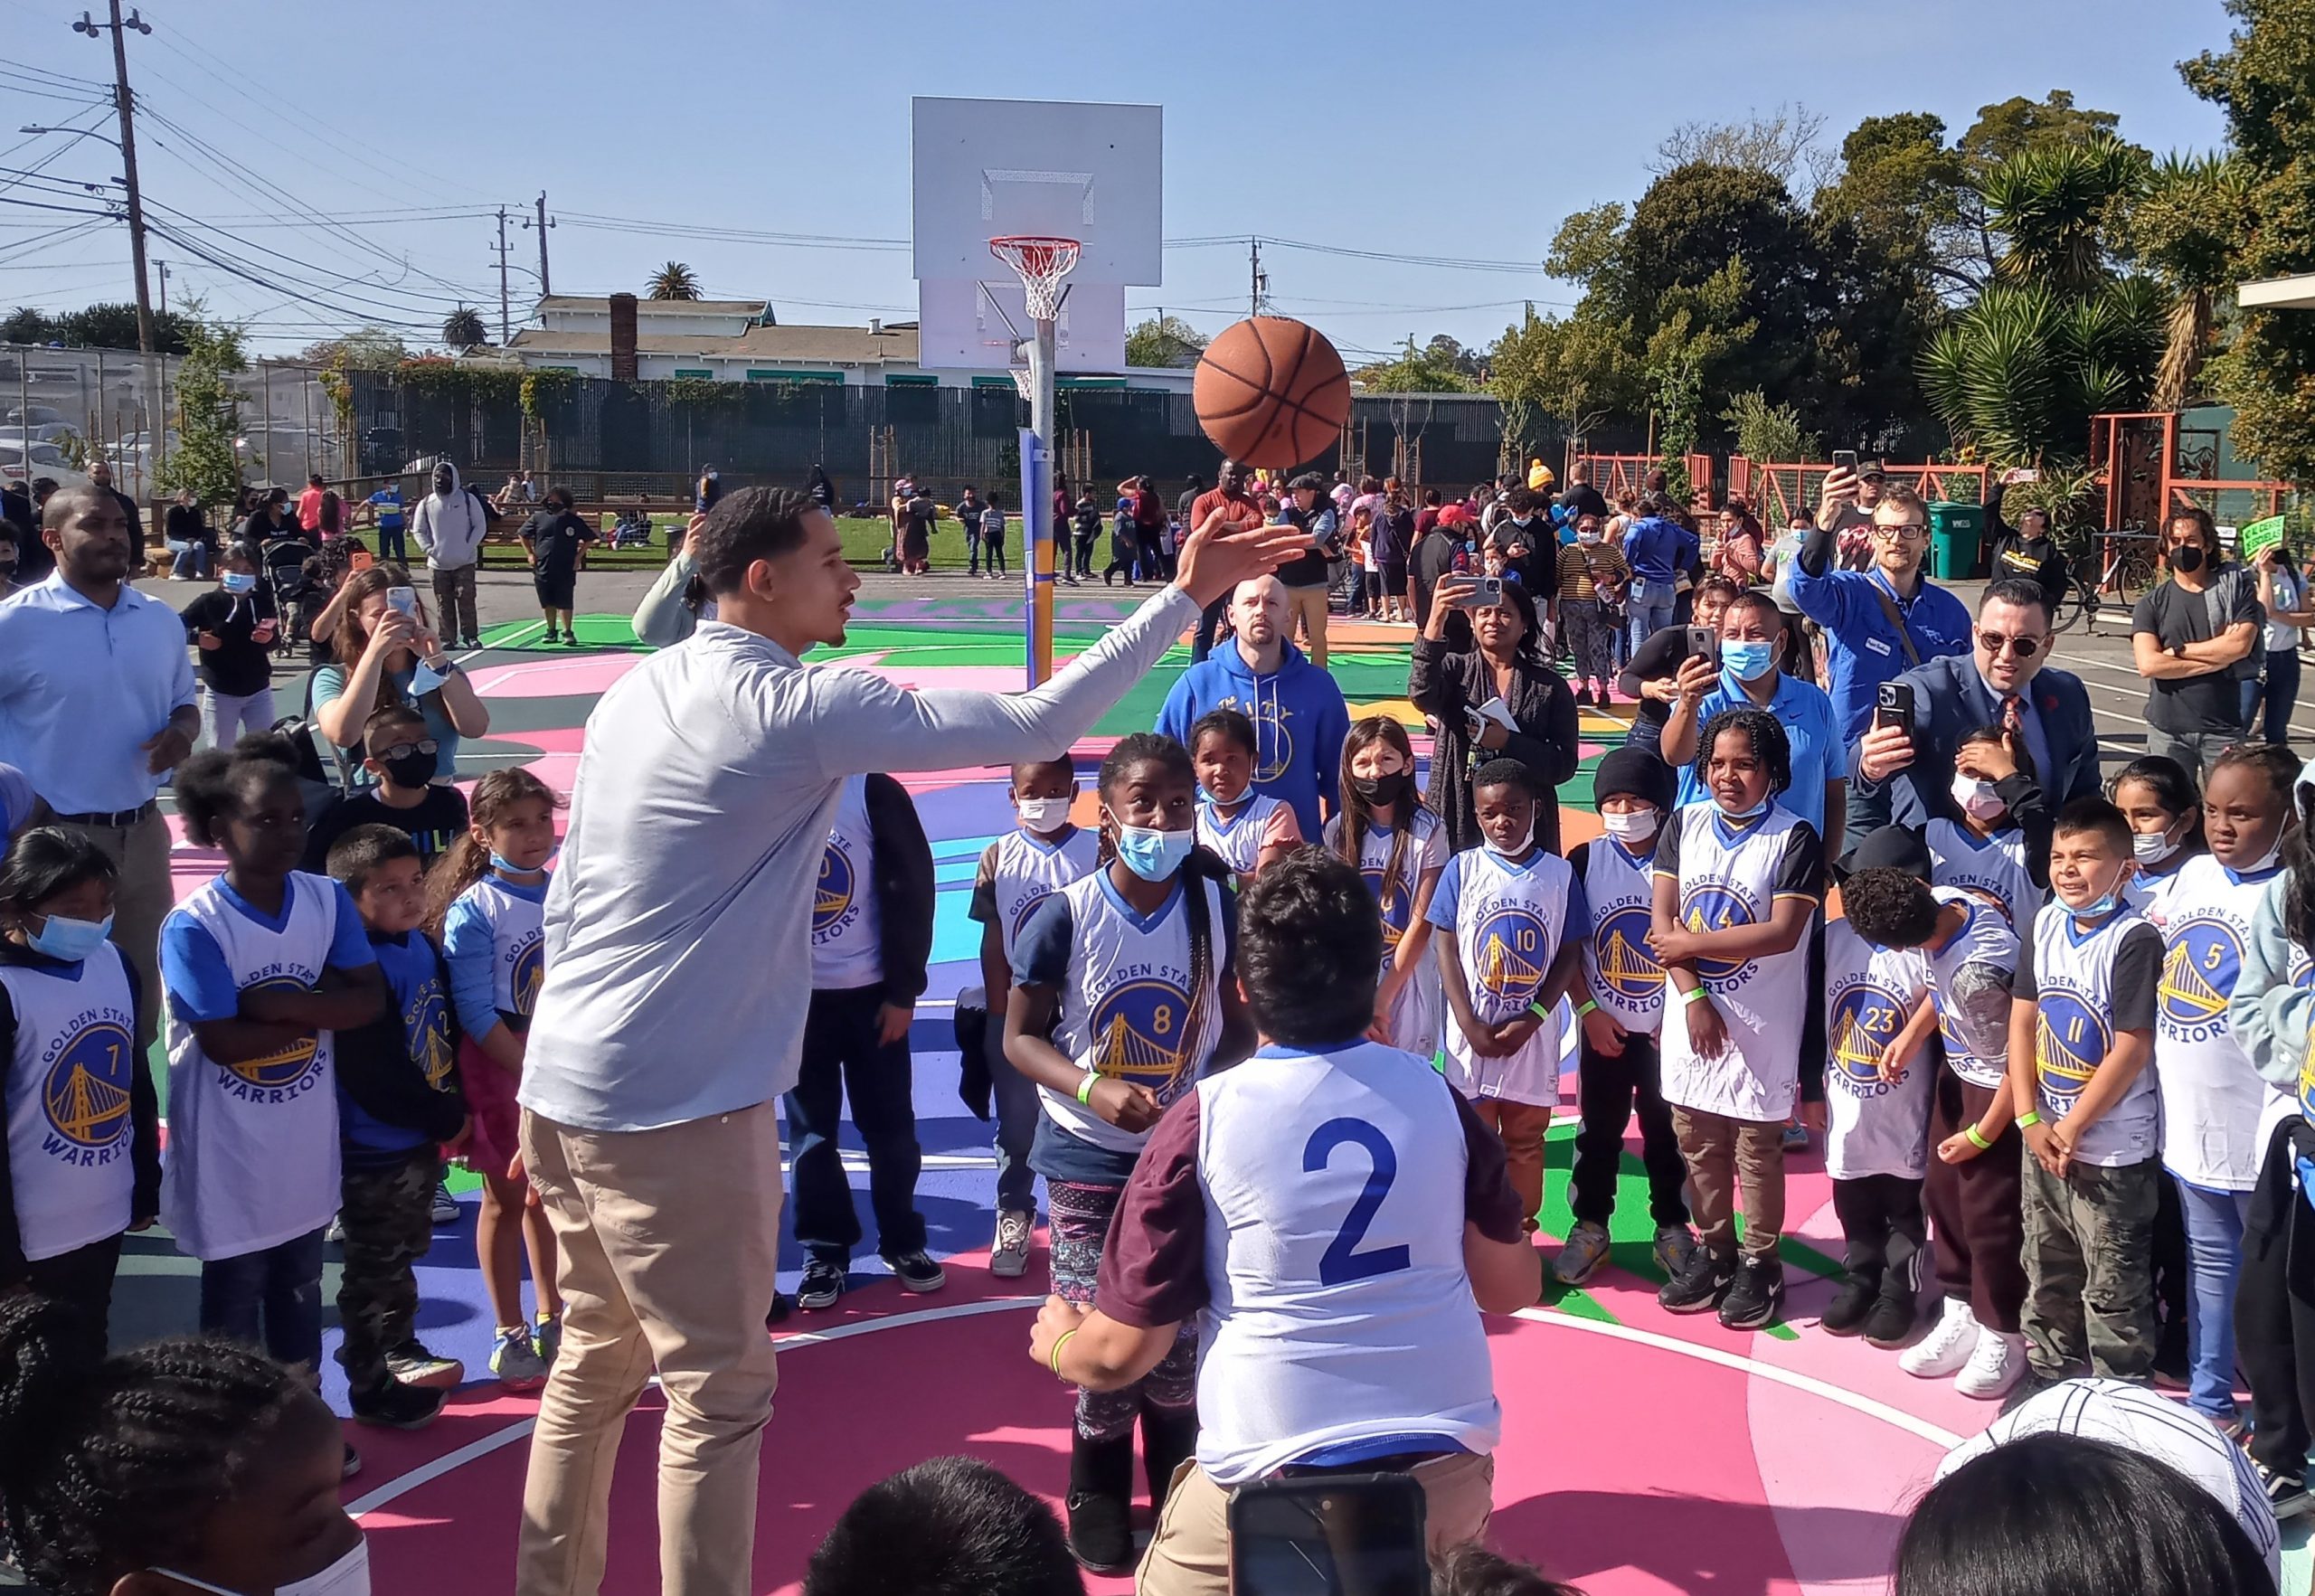 image of tall NBA player with mustache in new basketball court at elementary school, with a bunch of elementary kids surrounding him